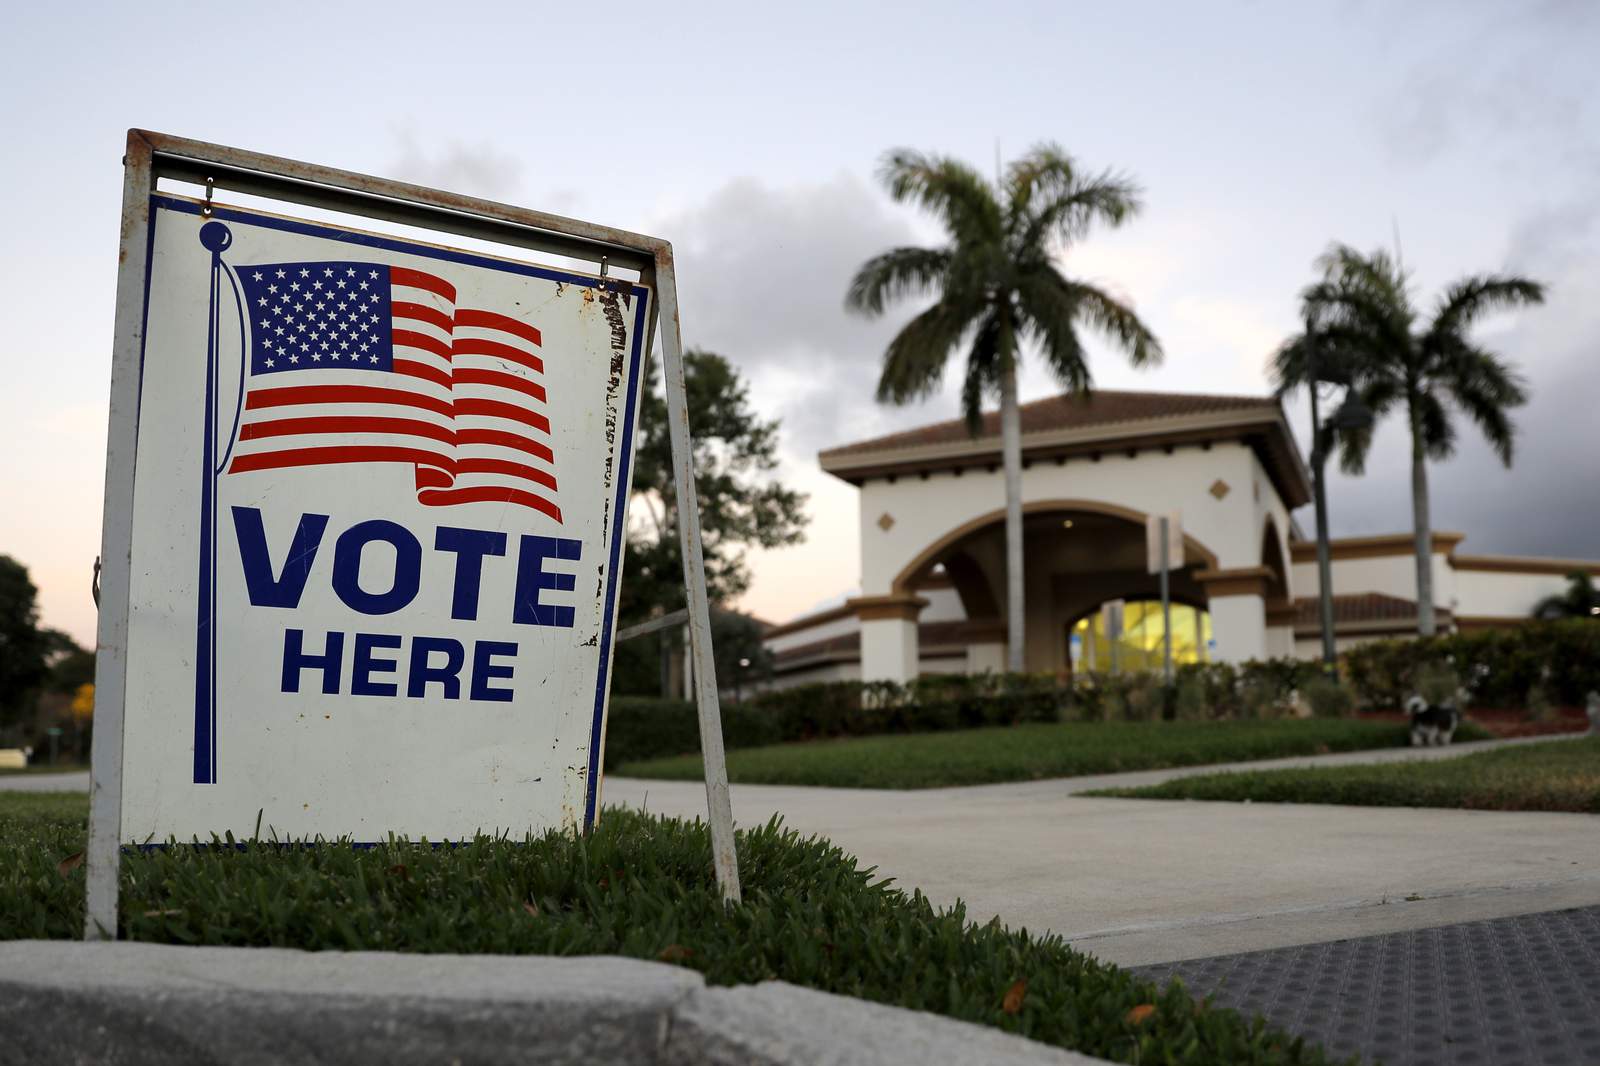 Candidates qualifing for Florida legislature, sheriff, other offices